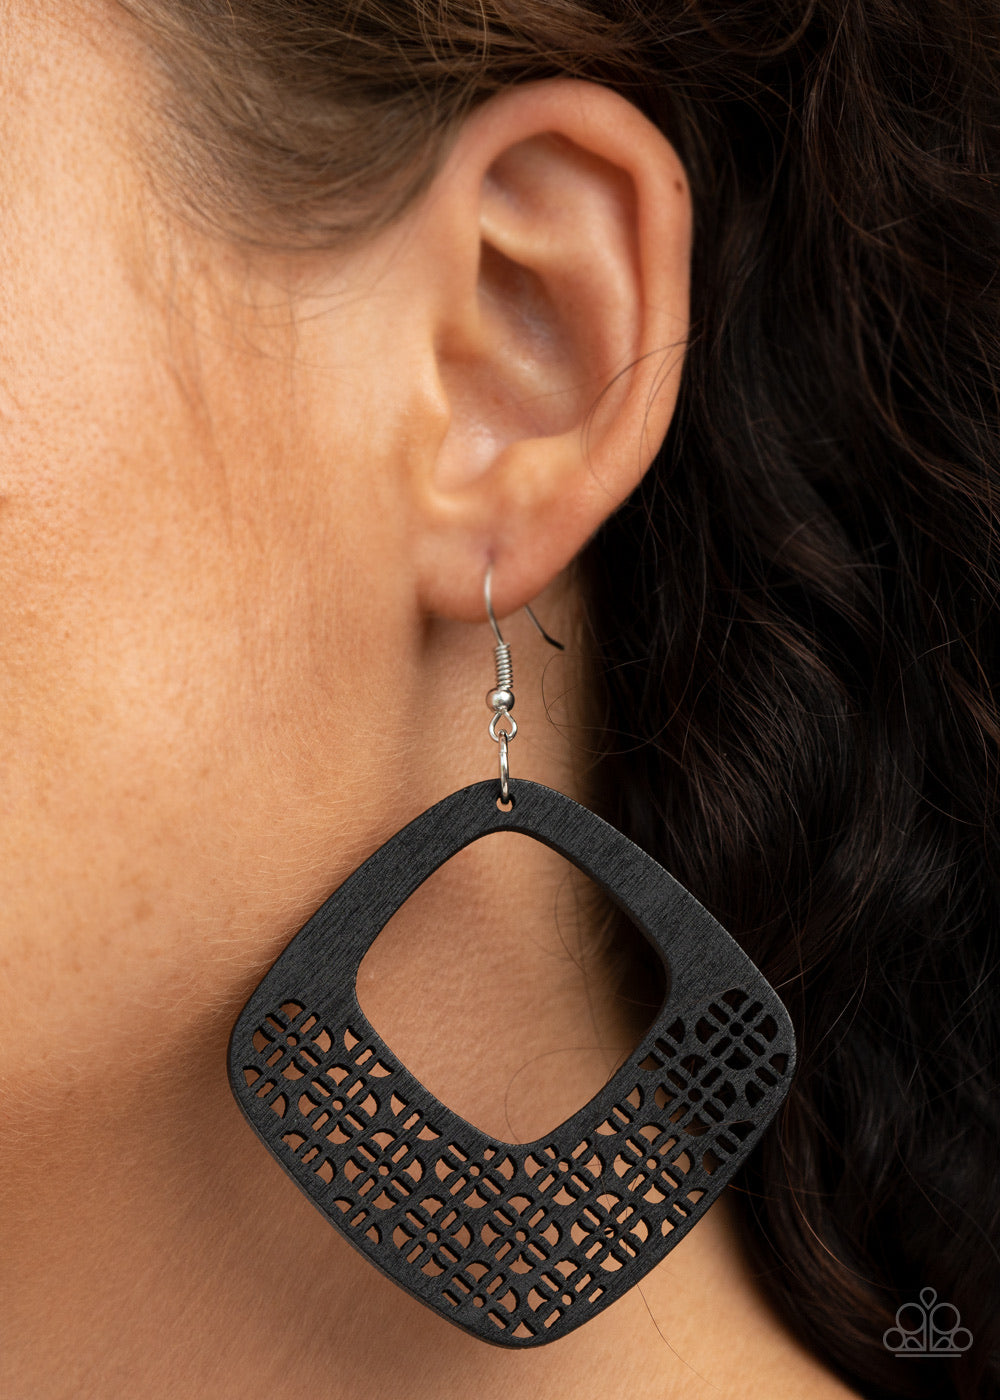 Paparazzi Jewelry Earrings WOOD You Rather - Black